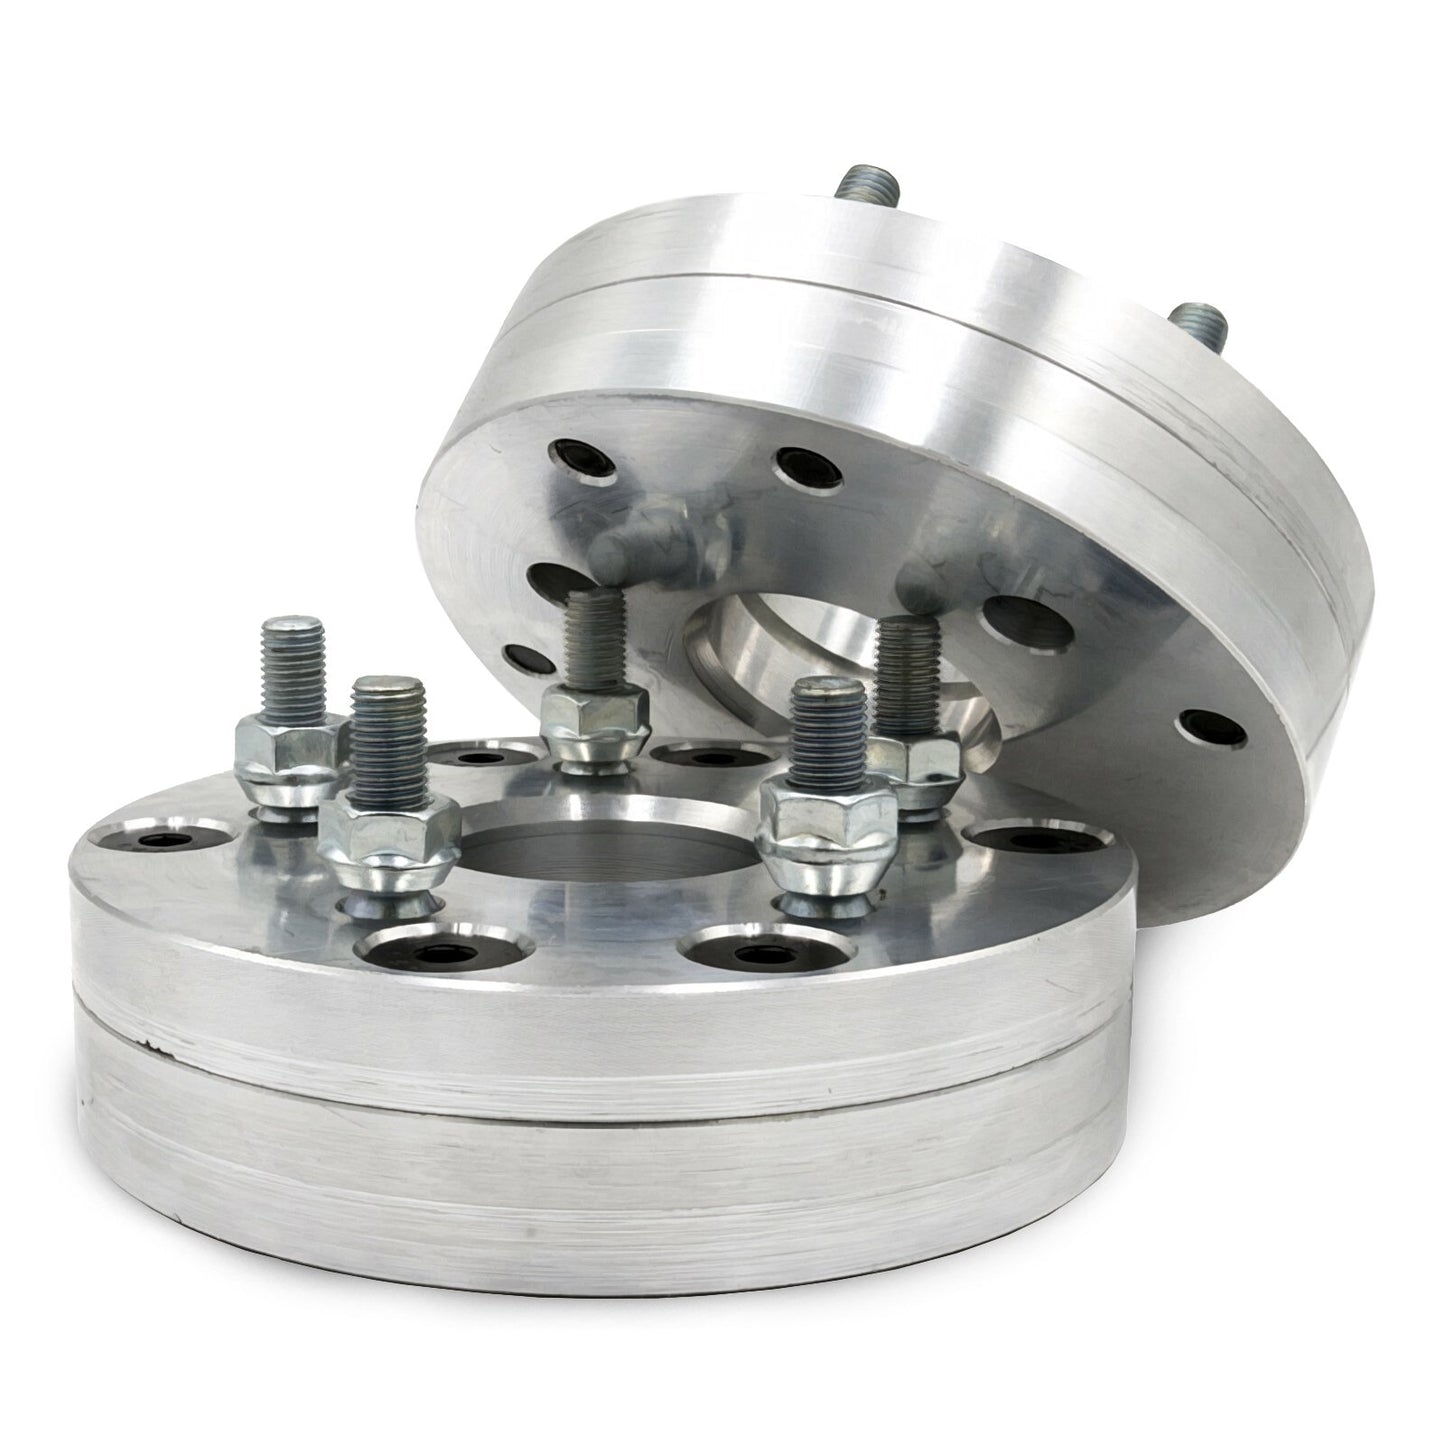 4x100 to 5x115 2 piece Wheel Adapter - Thickness: 1.5" - 3"